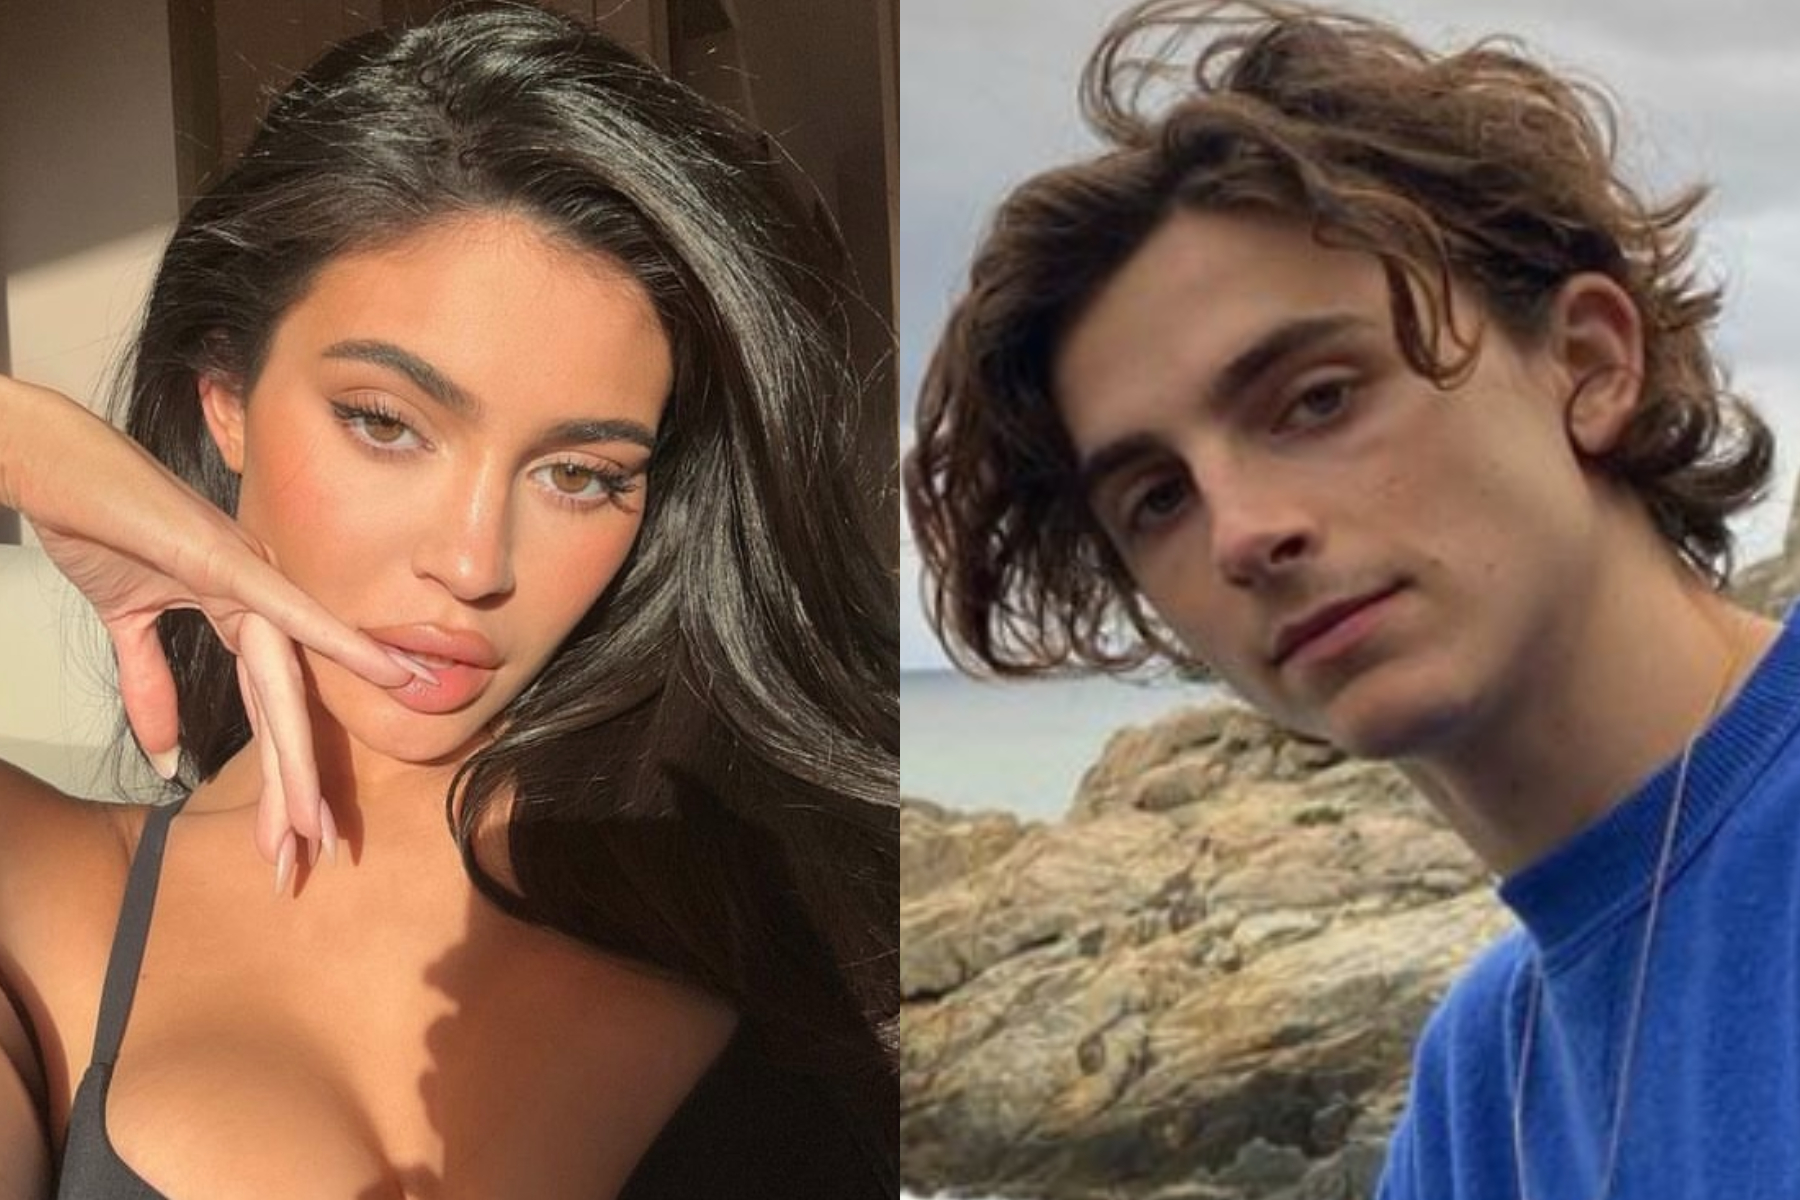 The truth behind Kylie Jenner and Timothée Chalamet split rumours | Goss.ie